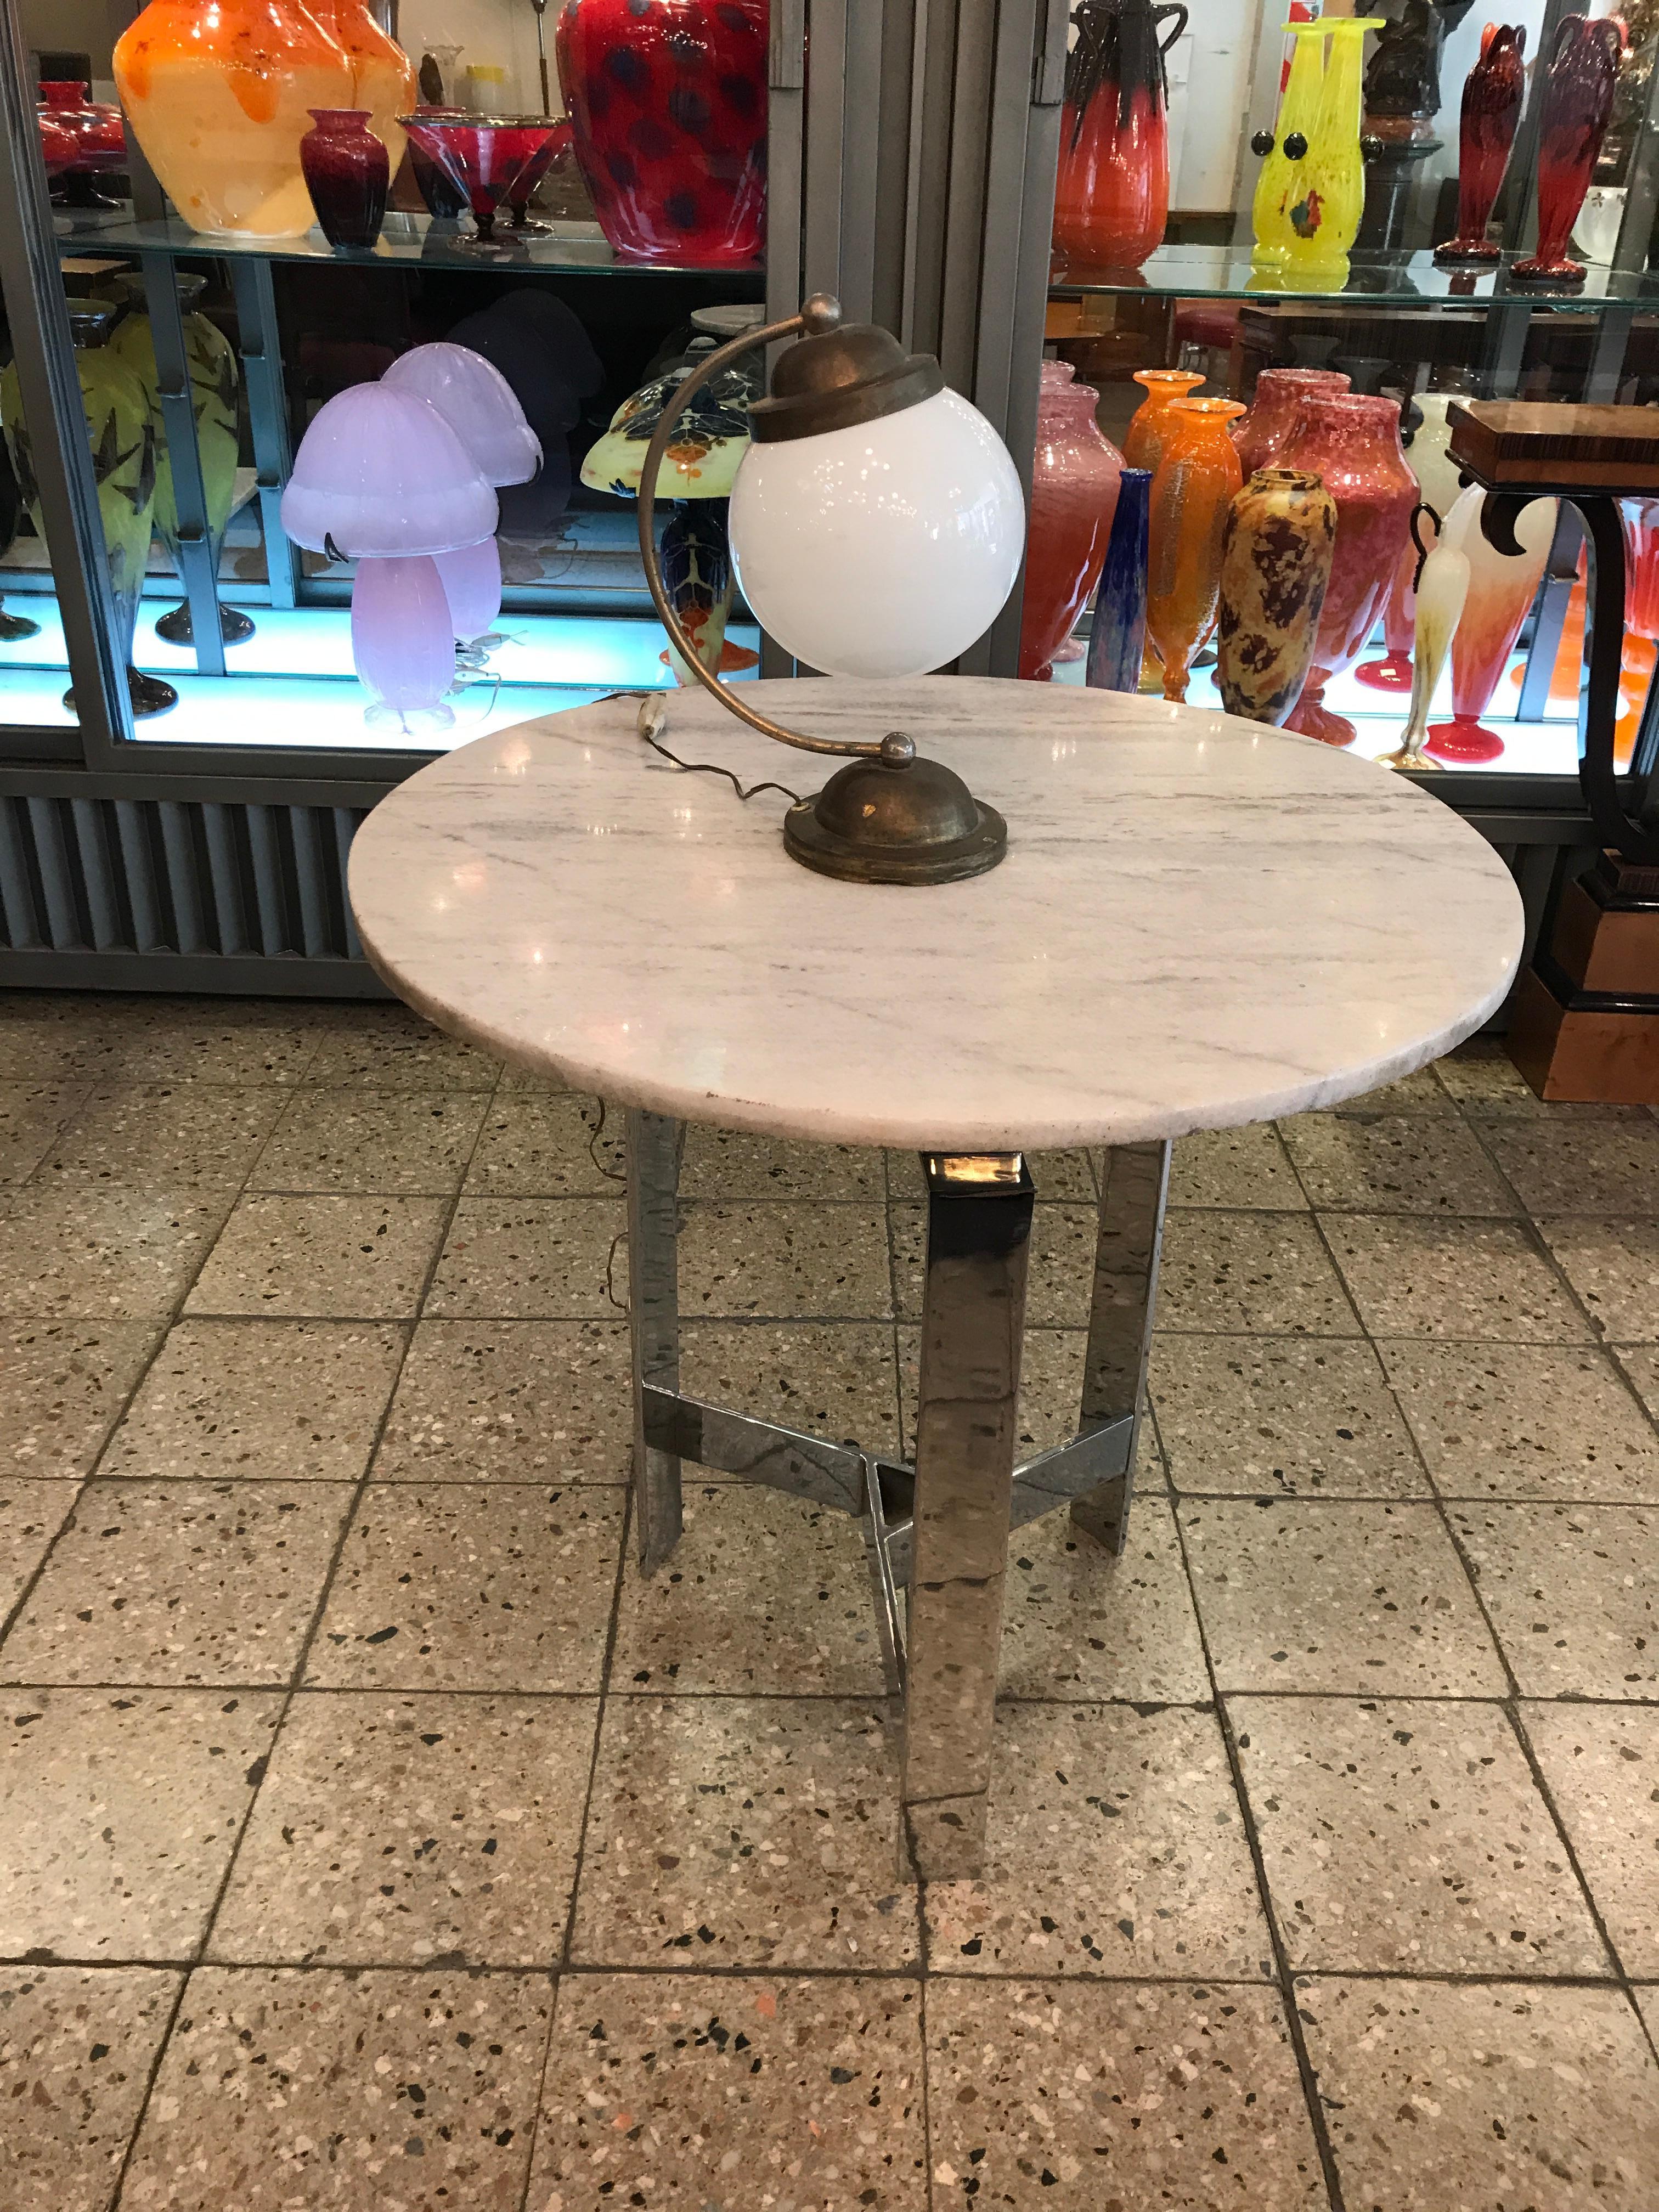 Table lamp Art deco

Materia: Opaline and bronze 
Style: Art Deco
Country: France
To take care of your property and the lives of our customers, the new wiring has been done.
If you want to live in the golden years, this is the table lamp that your